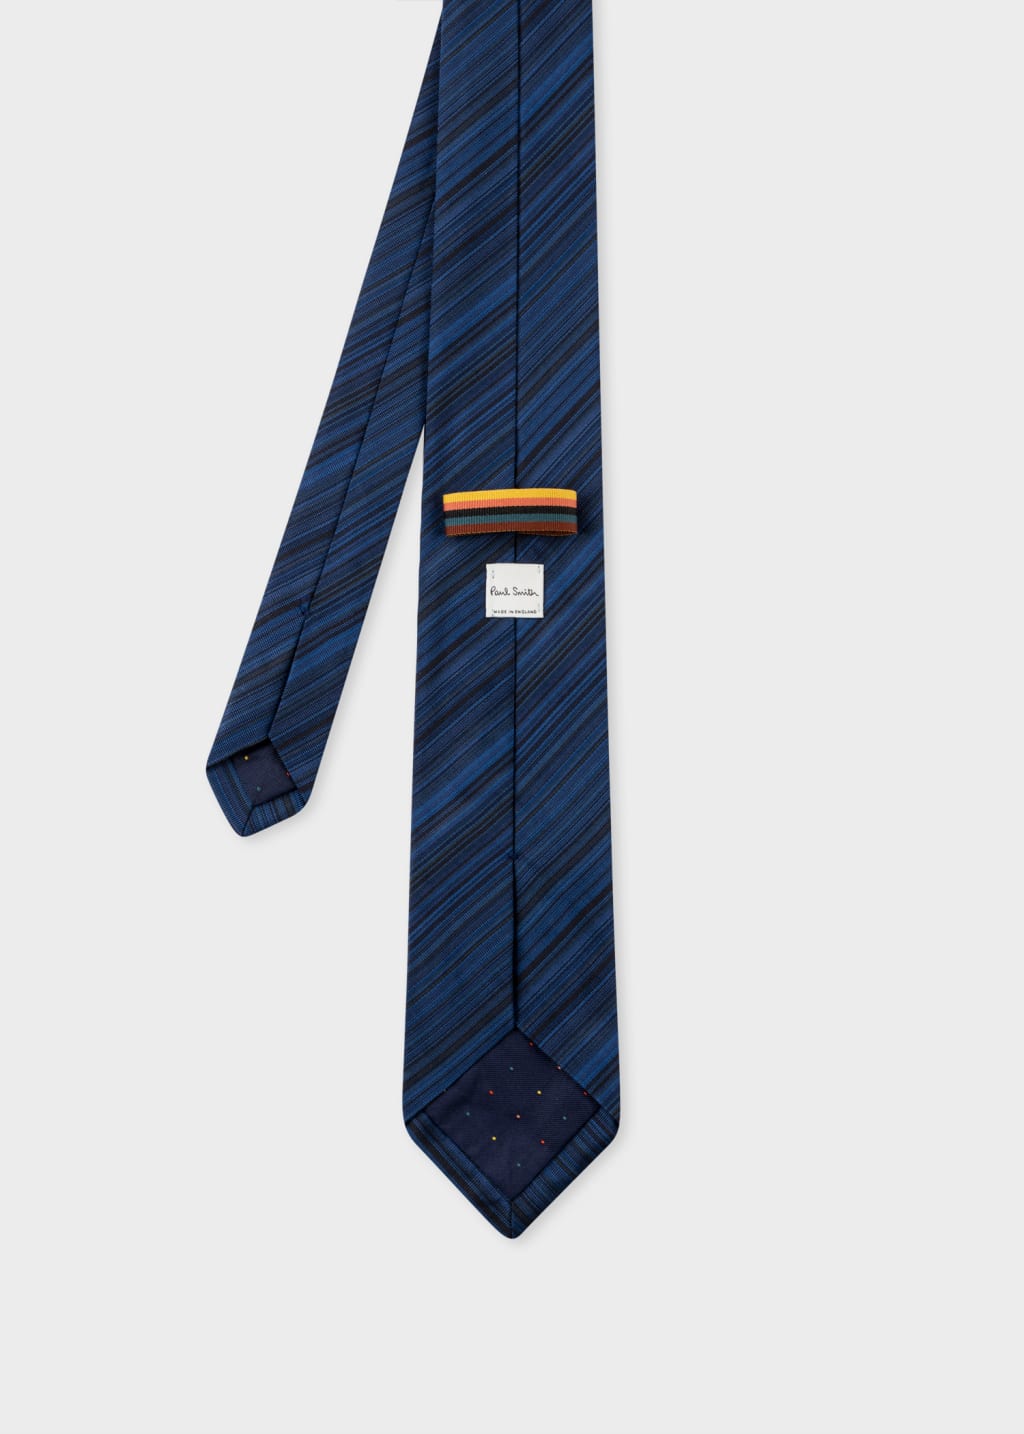 Back View - Blue Muted 'Signature Stripe' Silk Tie Paul Smith